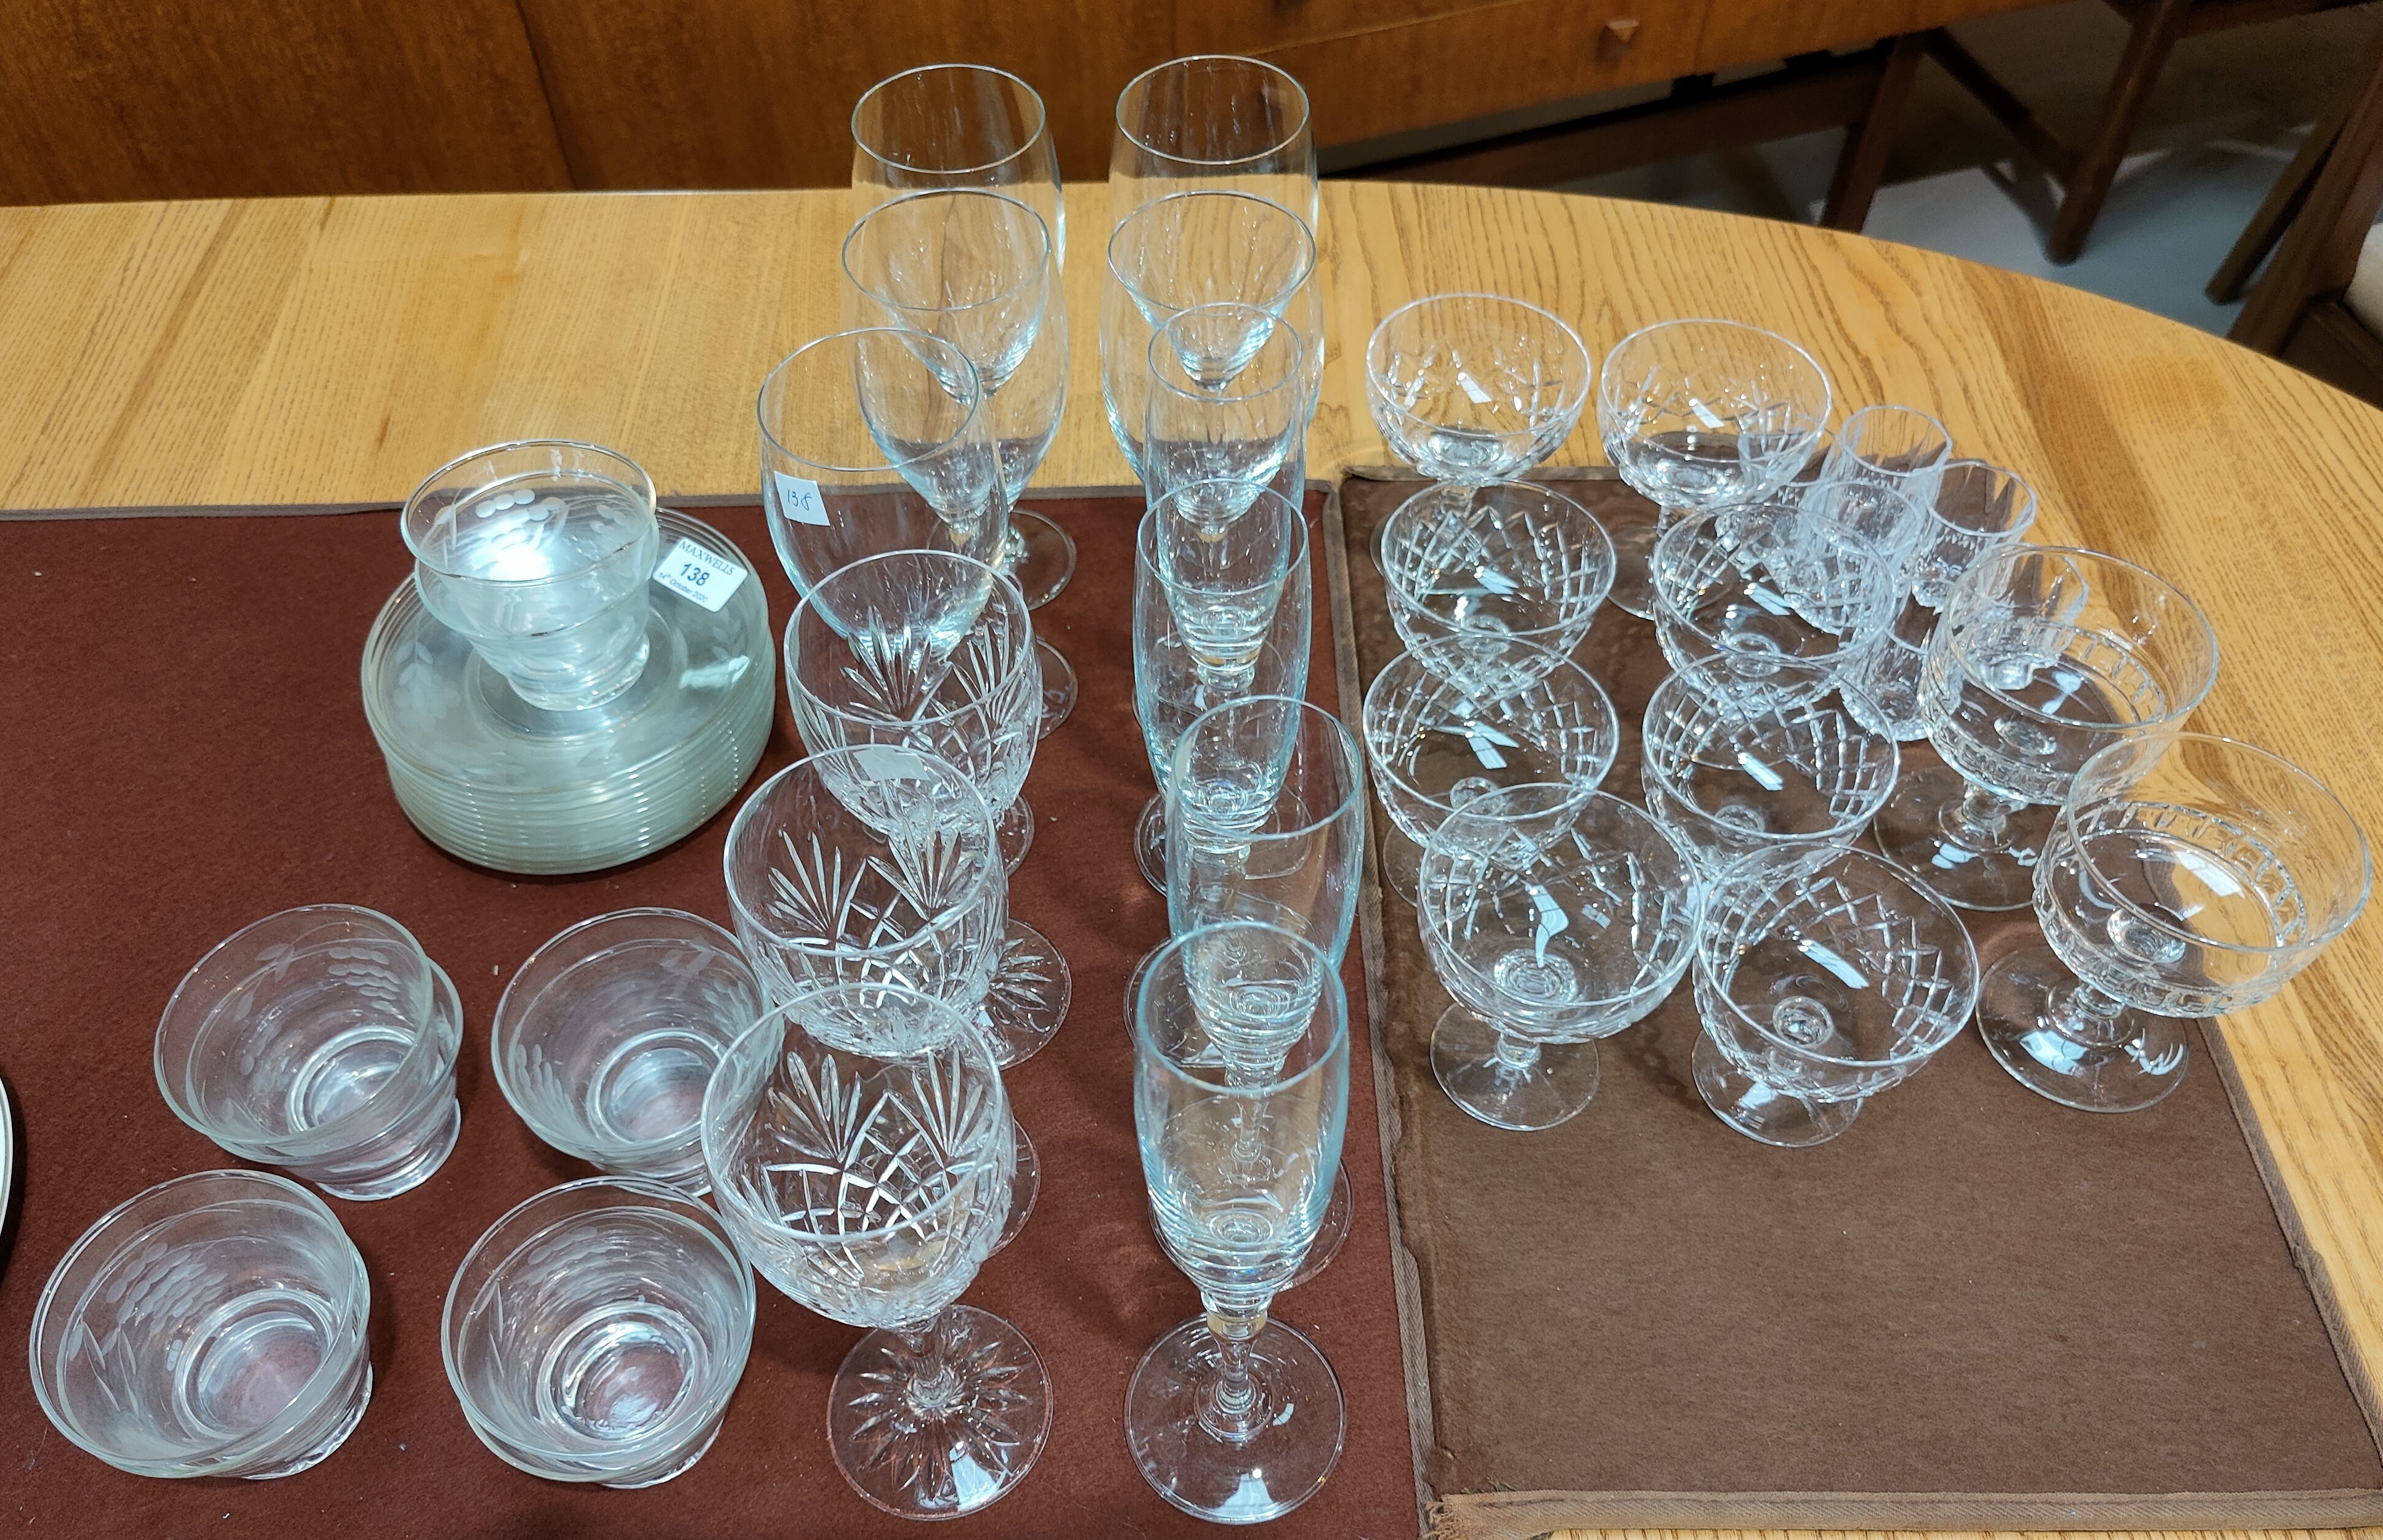 A set of 10 1950's Canadian etched dessert bowls and plates and other glassware